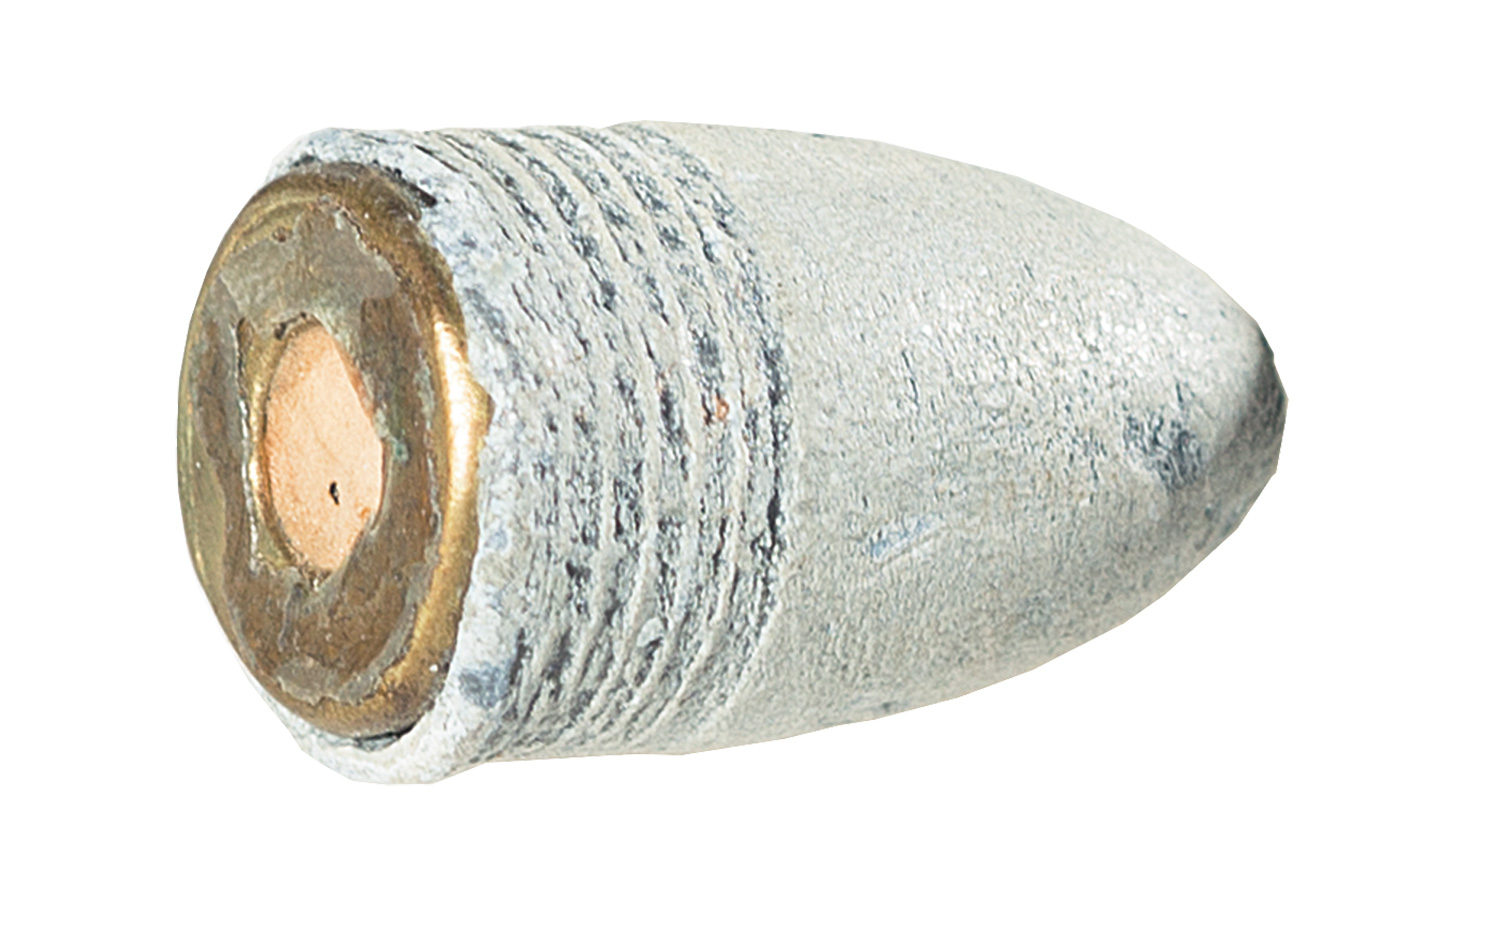 A Volcanic cartridge or "Rocket Ball" for a Volcanic lever action. (Picture courtesy rockislandauction.com).